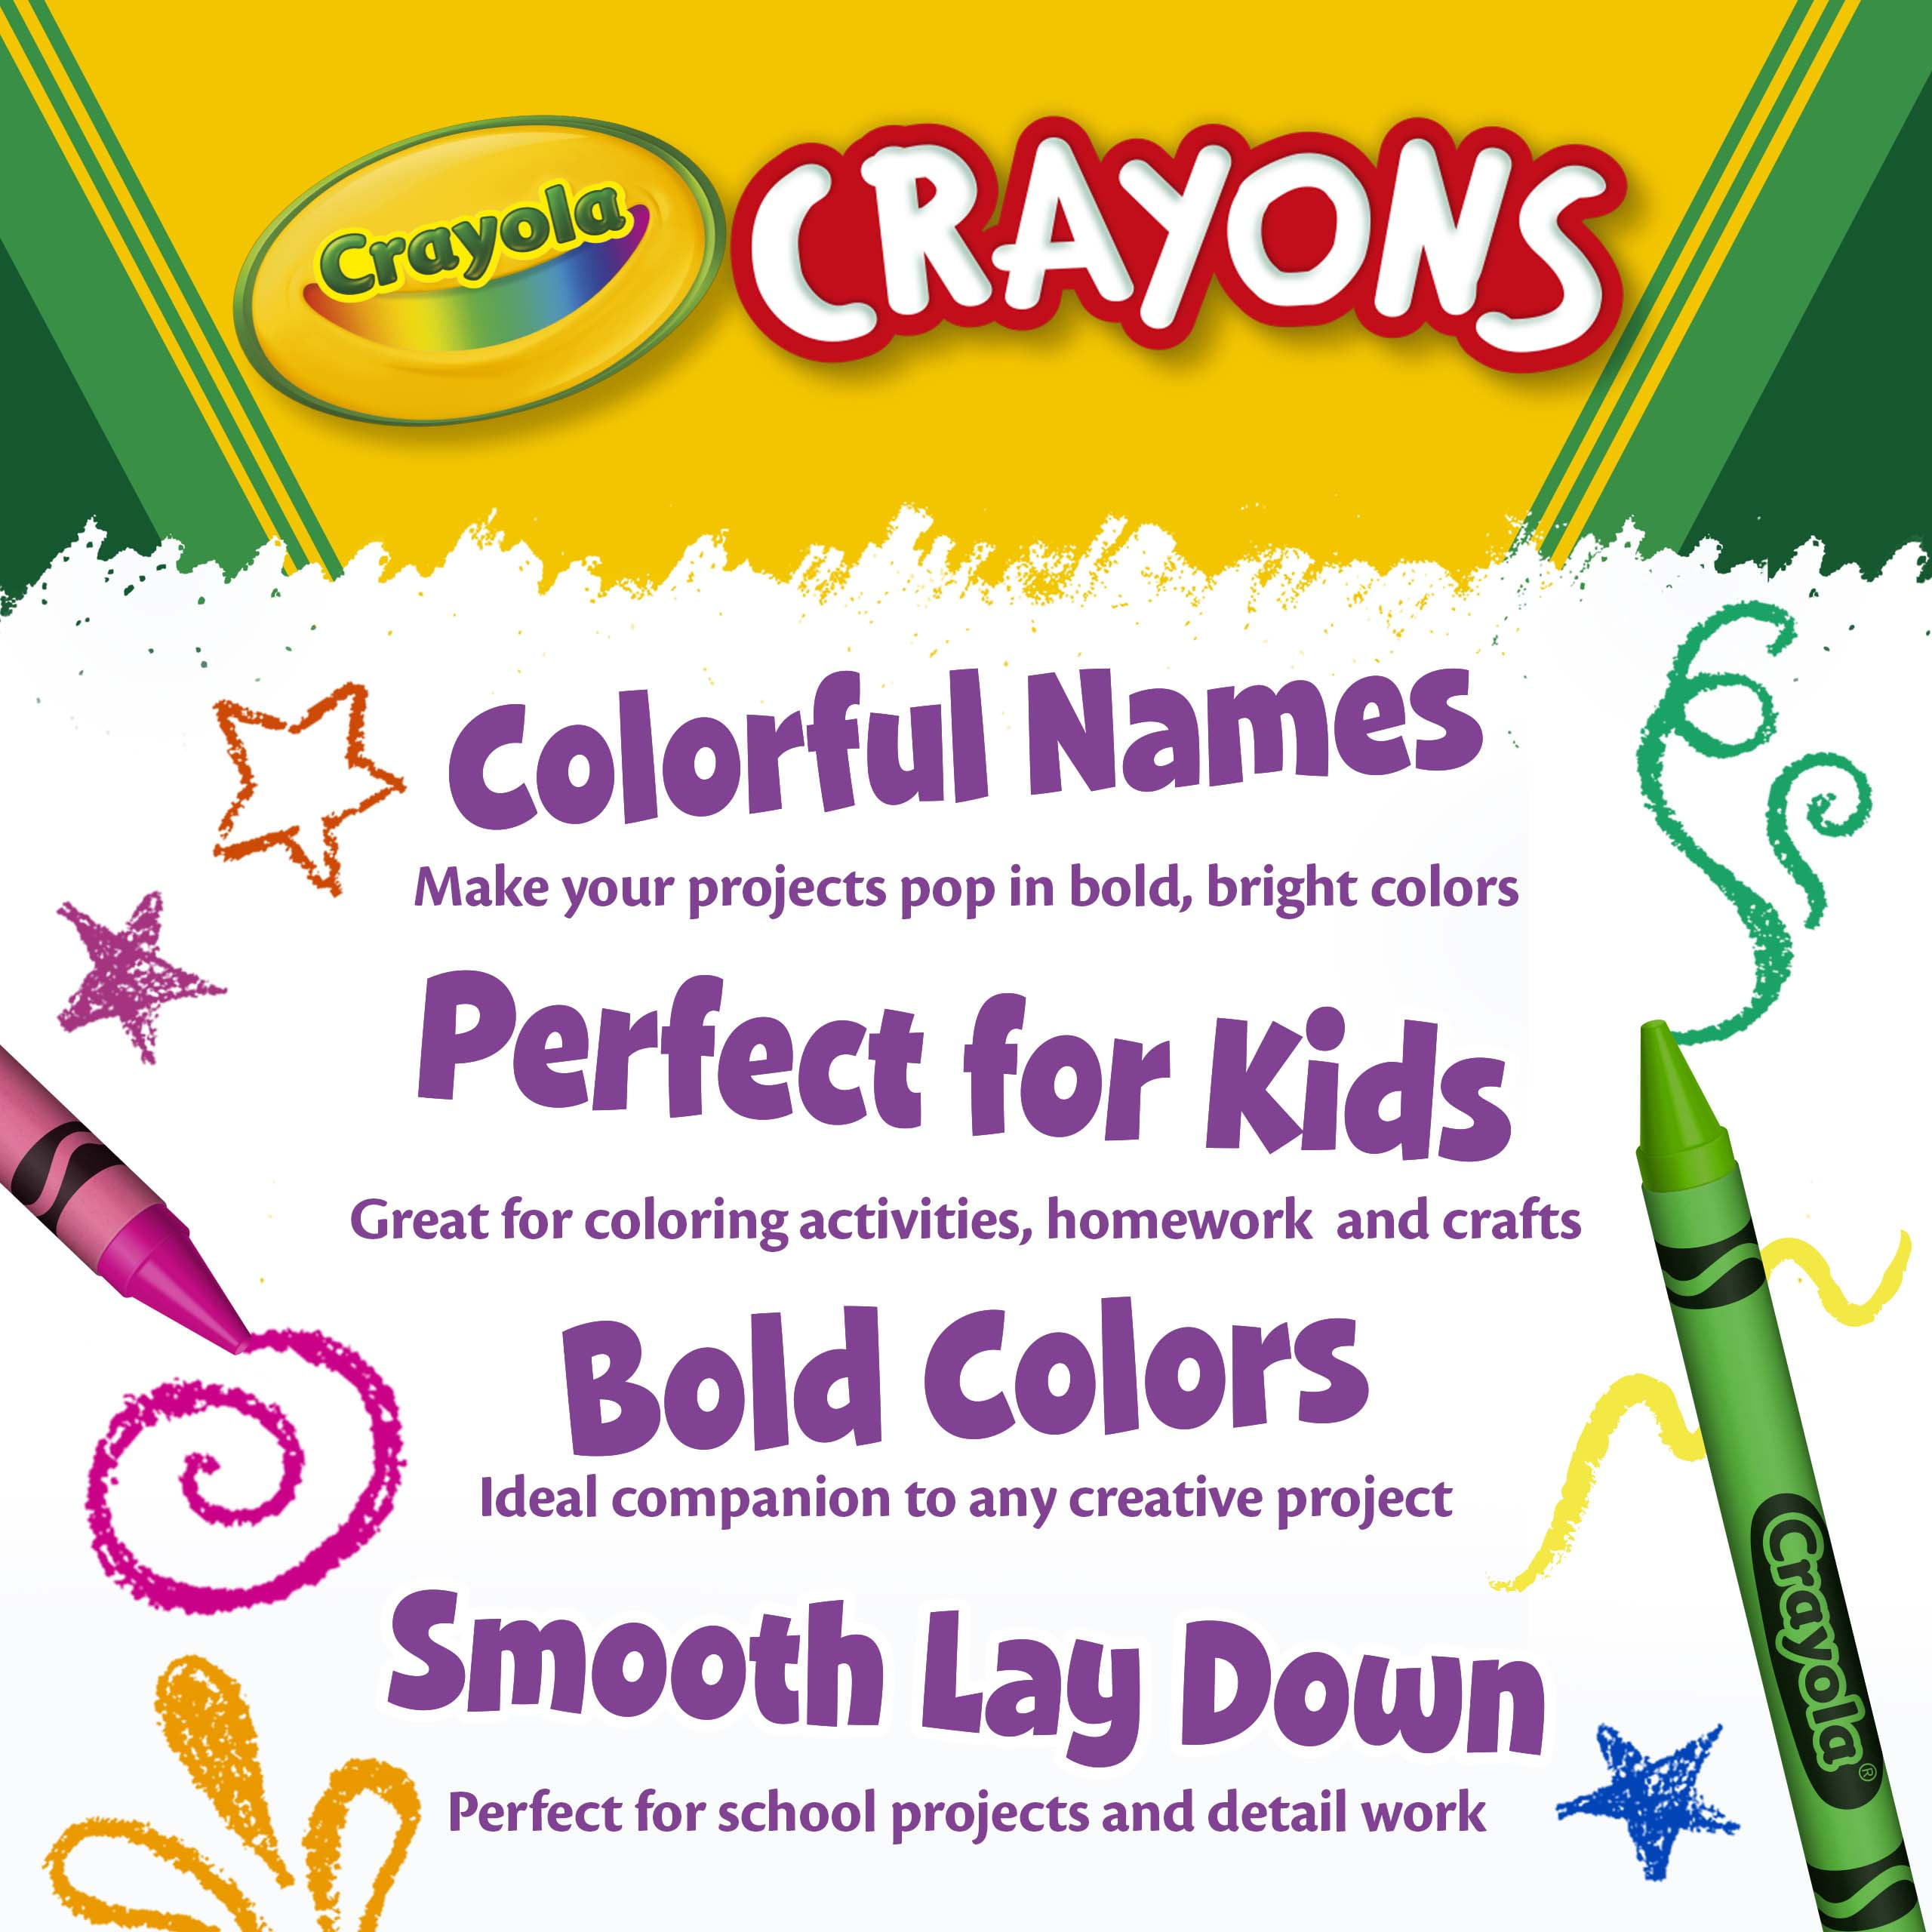 Crayola Crayons 52-0064 Crayons Assorted Colors 64 Count Built-In